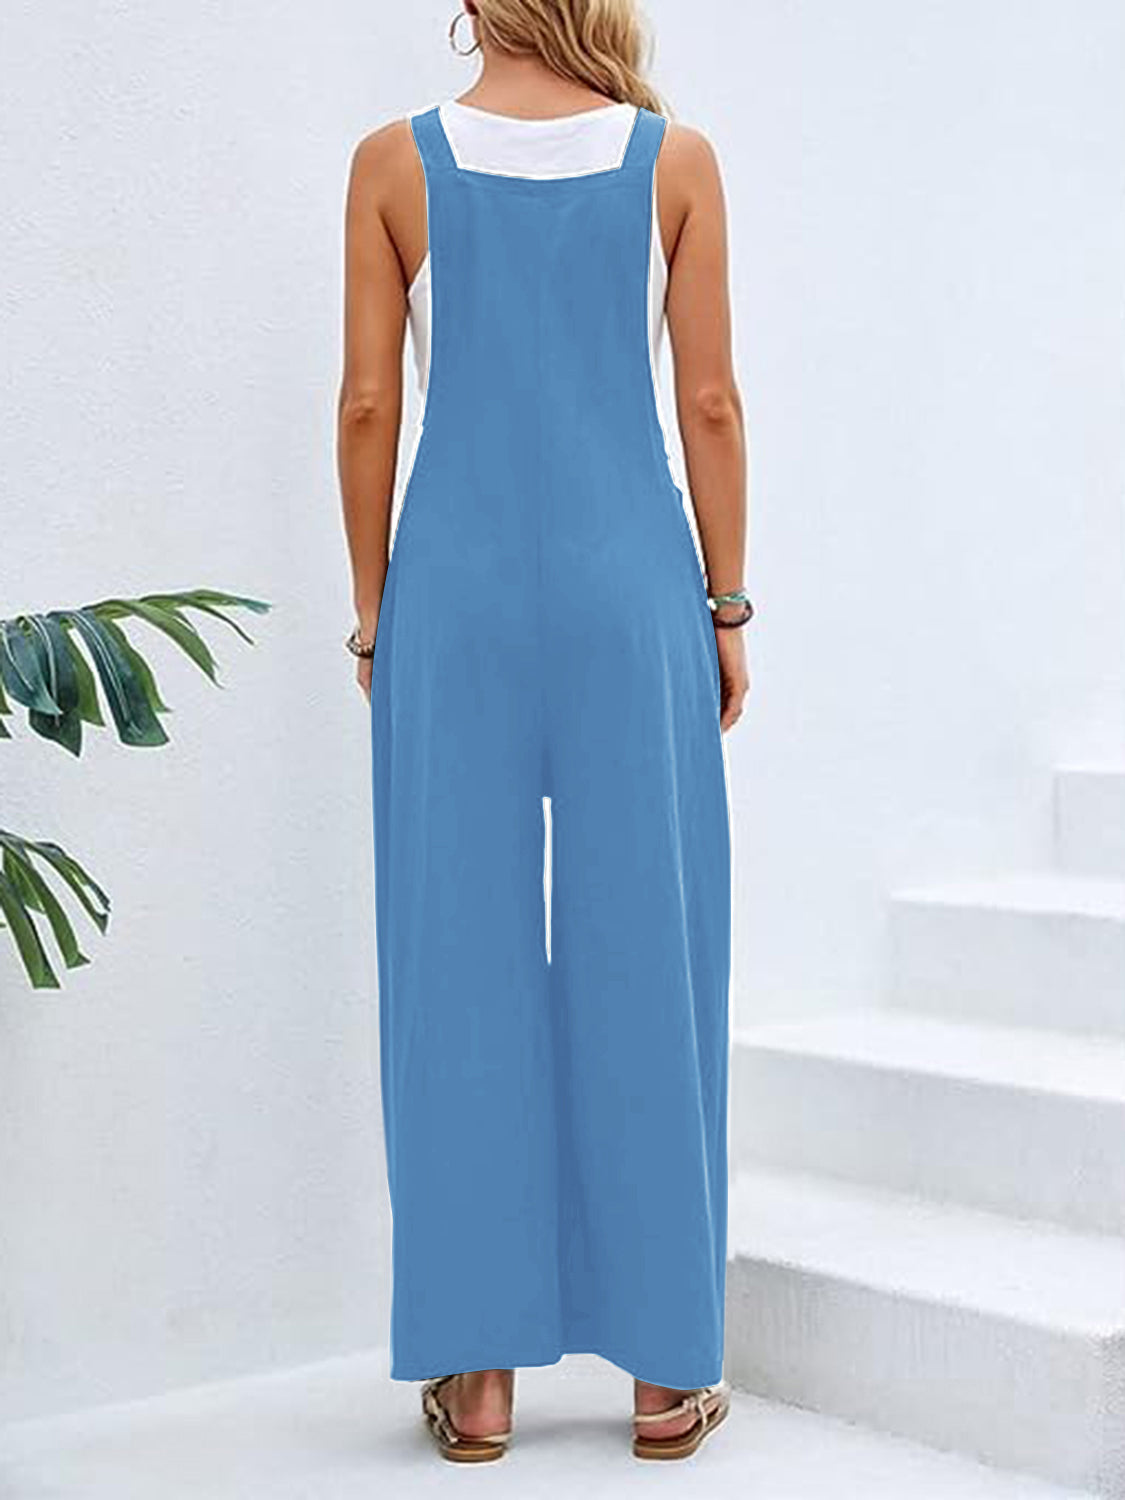 Wide Leg Overalls with Pockets - Bottoms - Overalls - 11 - 2024